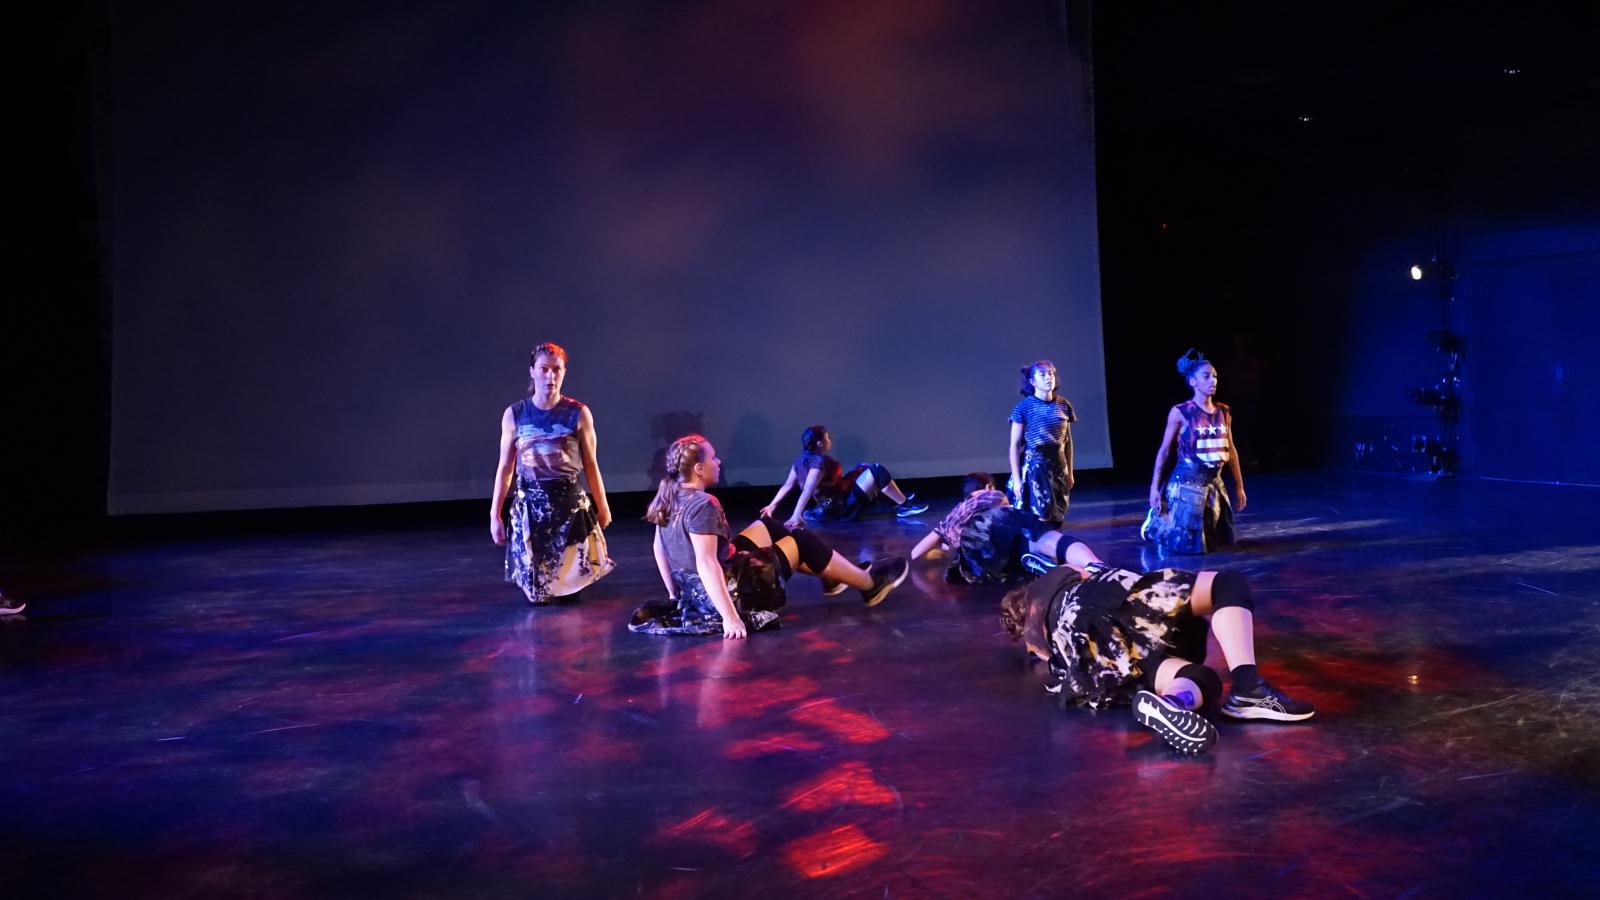 Dancers performing in a theatre